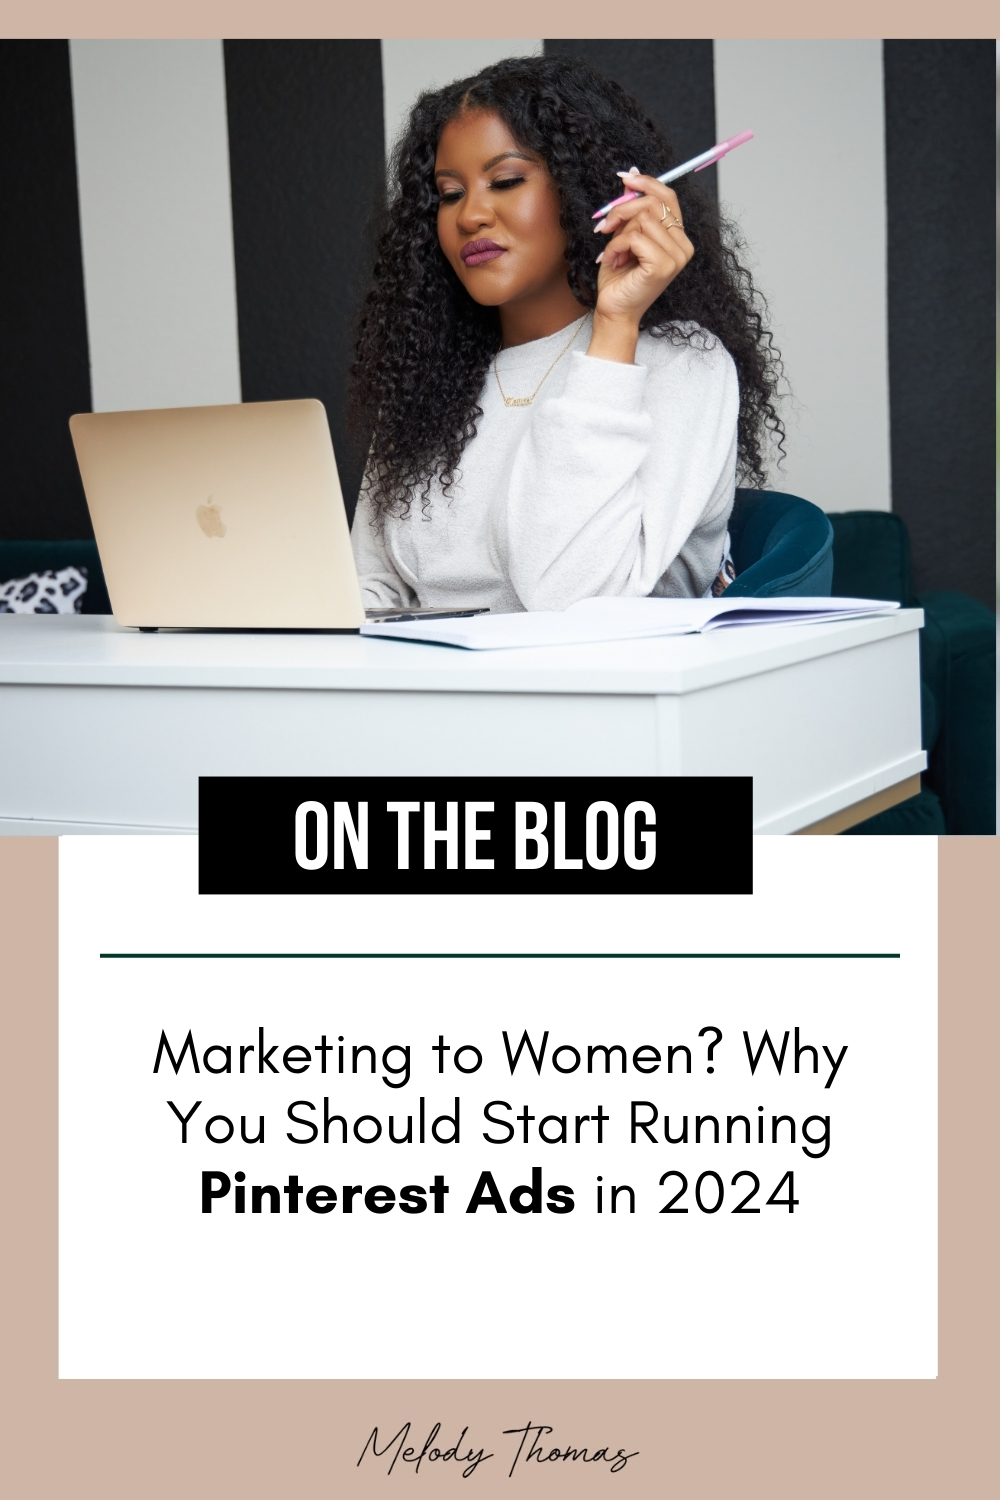 Marketing to Women? Why You Should Start Running Pinterest Ads in 2024